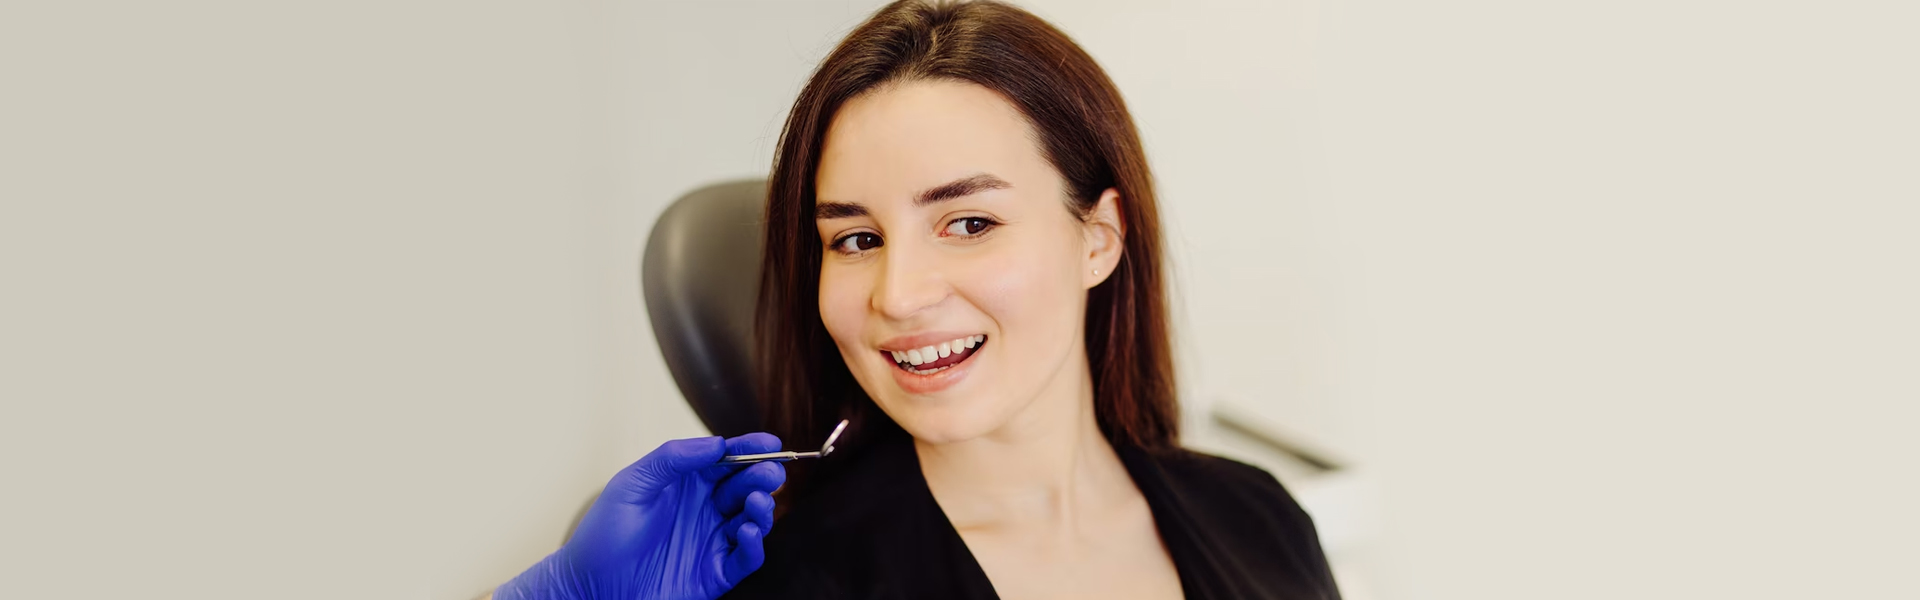 How to Prepare for a Smile Makeover Treatment